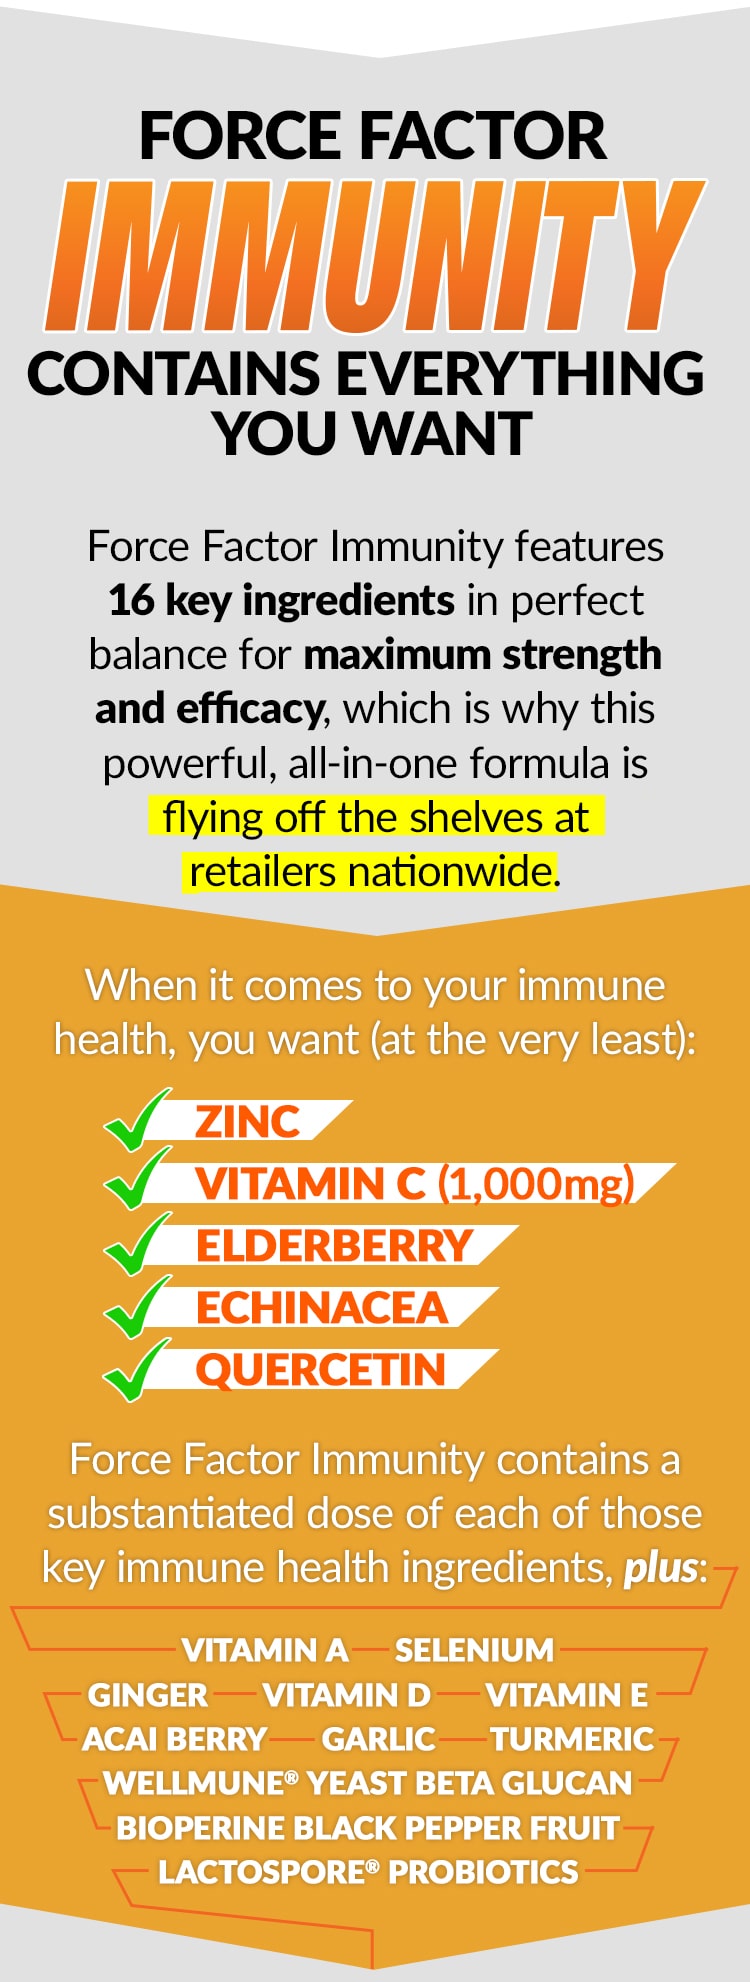 FORCE FACTOR IMMUNITY CONTAINS EVERYTHING YOU WANT. Force Factor Immunity features 16 key ingredients in perfect balance for maximum strength and efficacy, which is why this powerful, all-in-one formula is flying off the shelves at retailers nationwide. When it comes to your immune health, you want (at the very least): Zinc, Vitamin C (1,000mg), Elderberry, Echinacea, Quercetin. Force Factor Immunity contains a substantiated dose of each of those key immune health ingredients, plus: Vitamin A, Vitamin D, Vitamin E, Selenium, Wellmune® Yeast Beta Glucan, Ginger, Turmeric, Acai Berry, Garlic, LactoSpore® Probiotics, BioPerine Black Pepper Fruit.